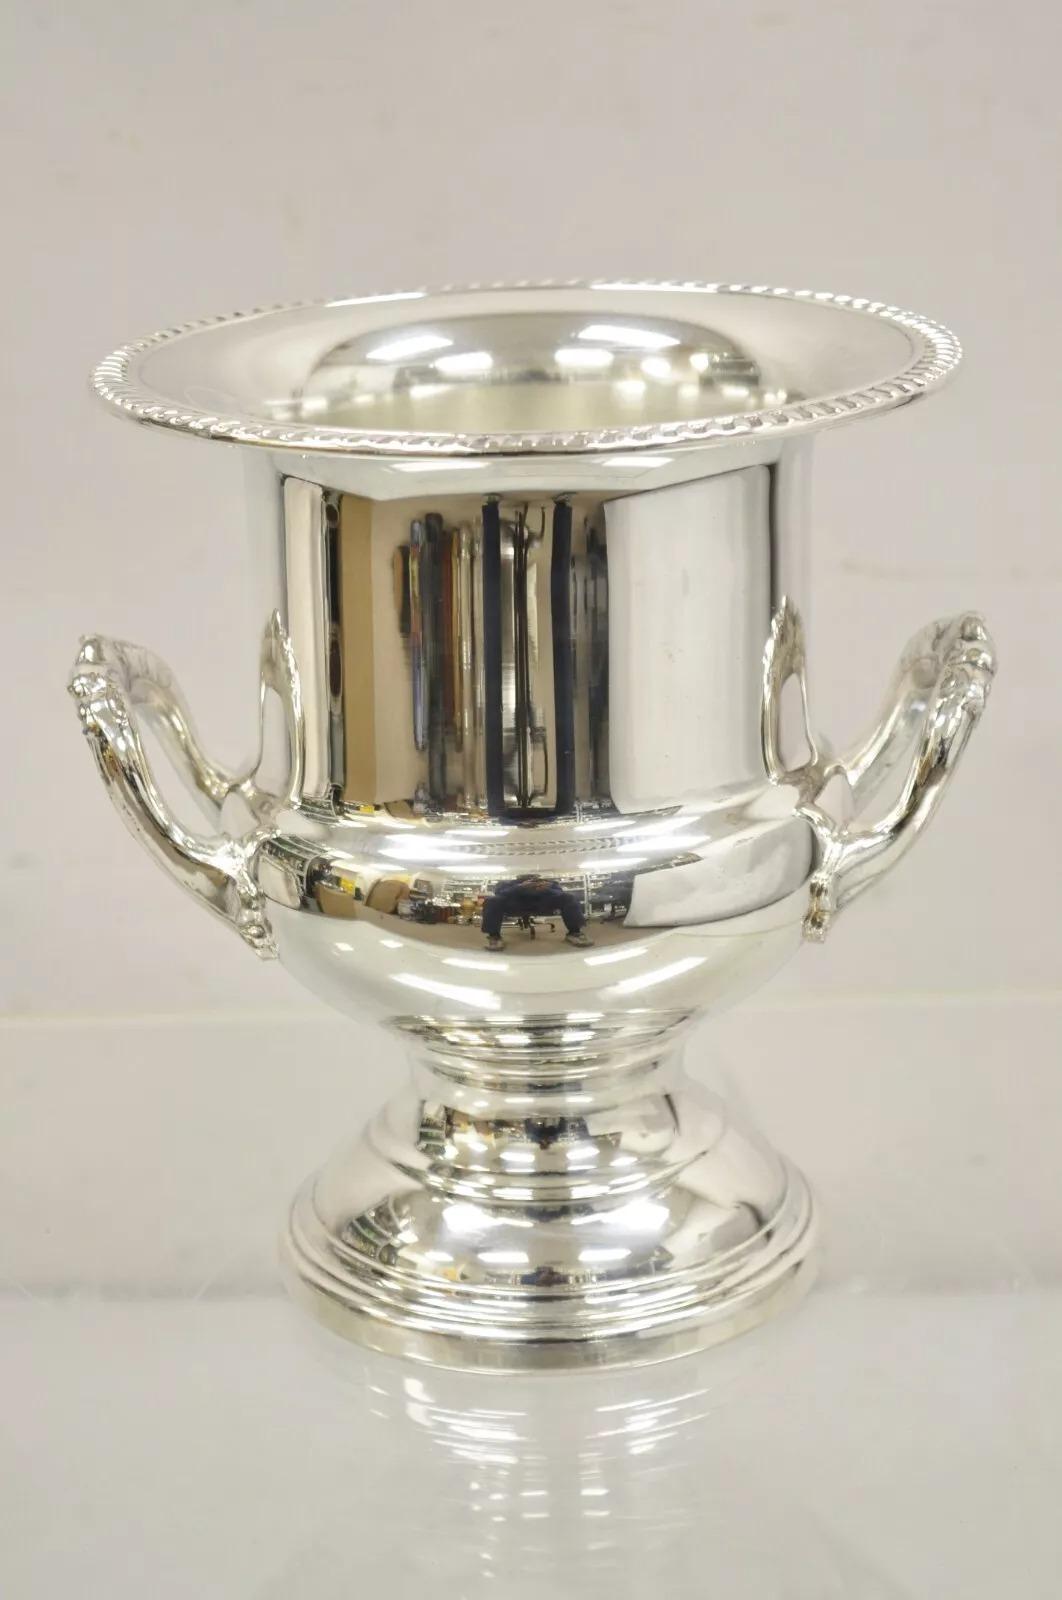 Vintage Leonard Silver Plated Trophy Cup Champagne Chiller Ice Bucket. Circa Mid to Late 20th Century. Measurements:  10